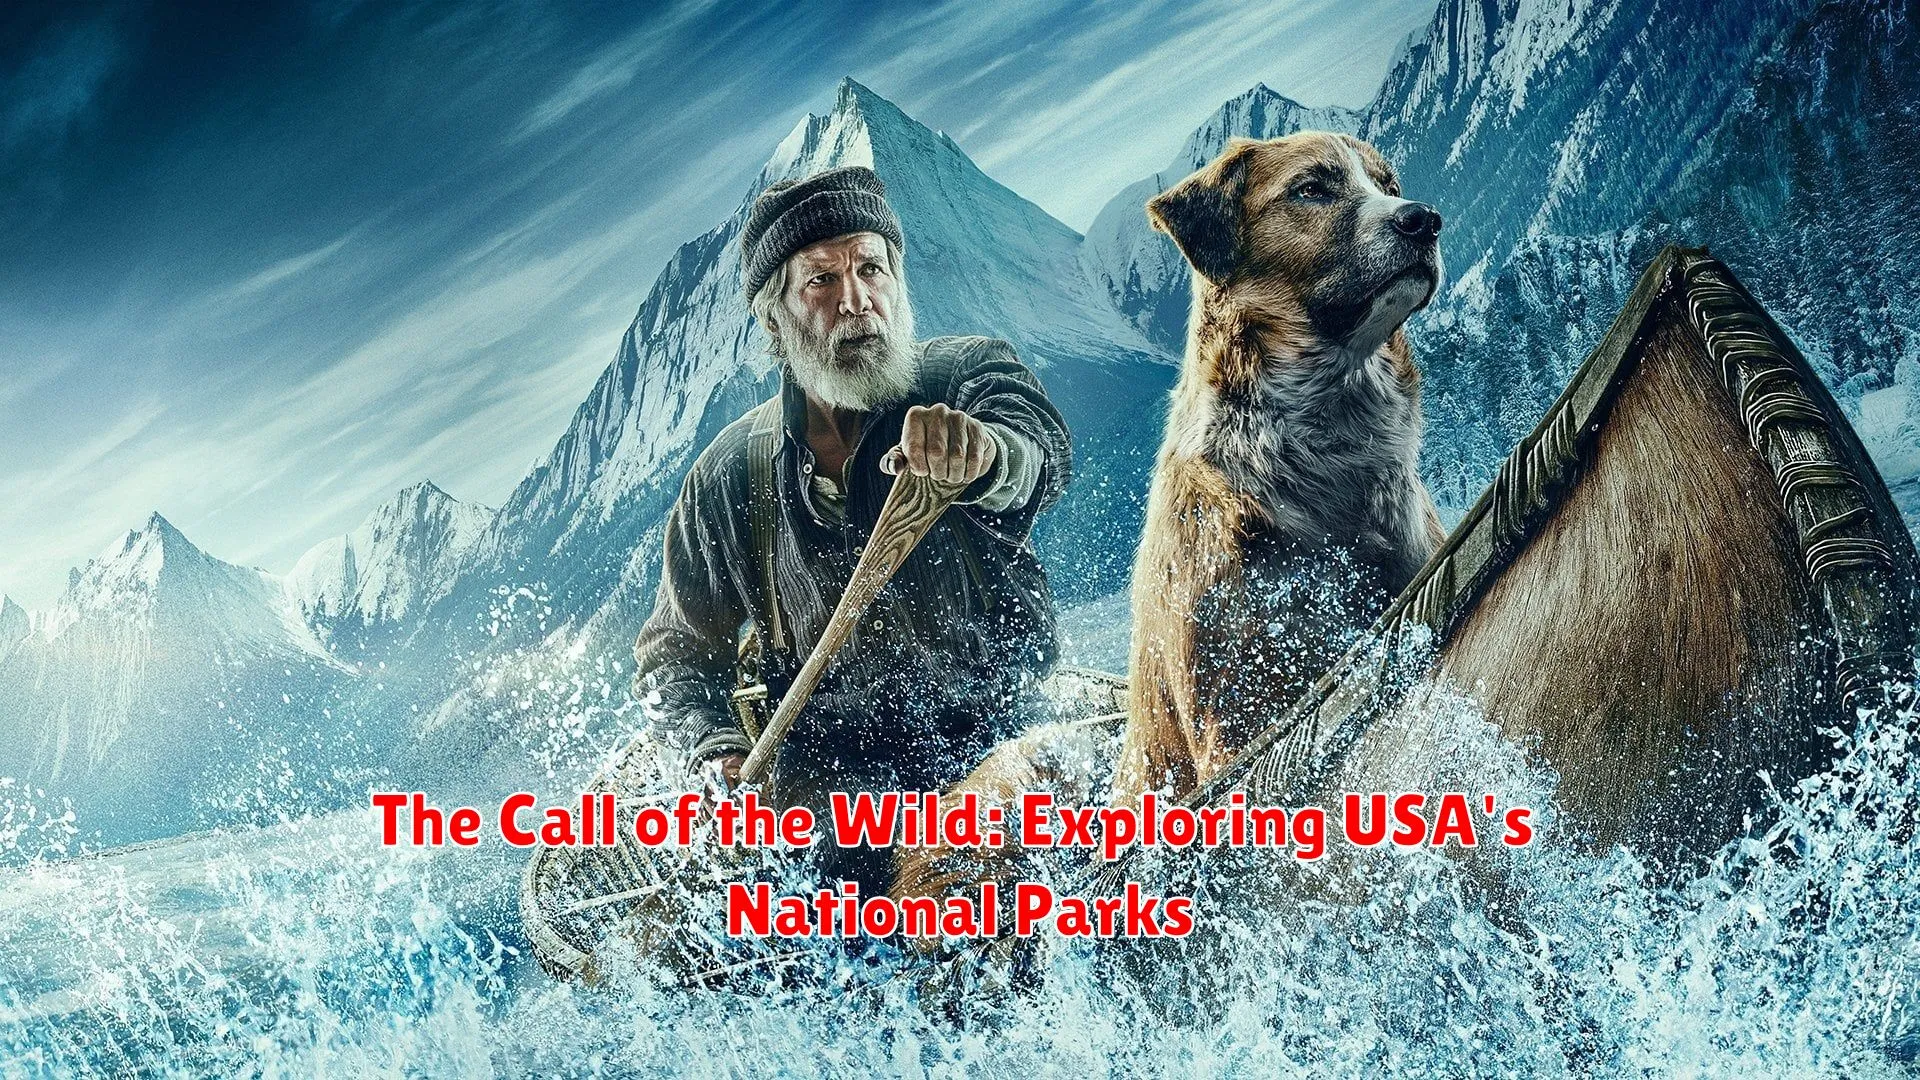 The Call of the Wild: Exploring USA's National Parks